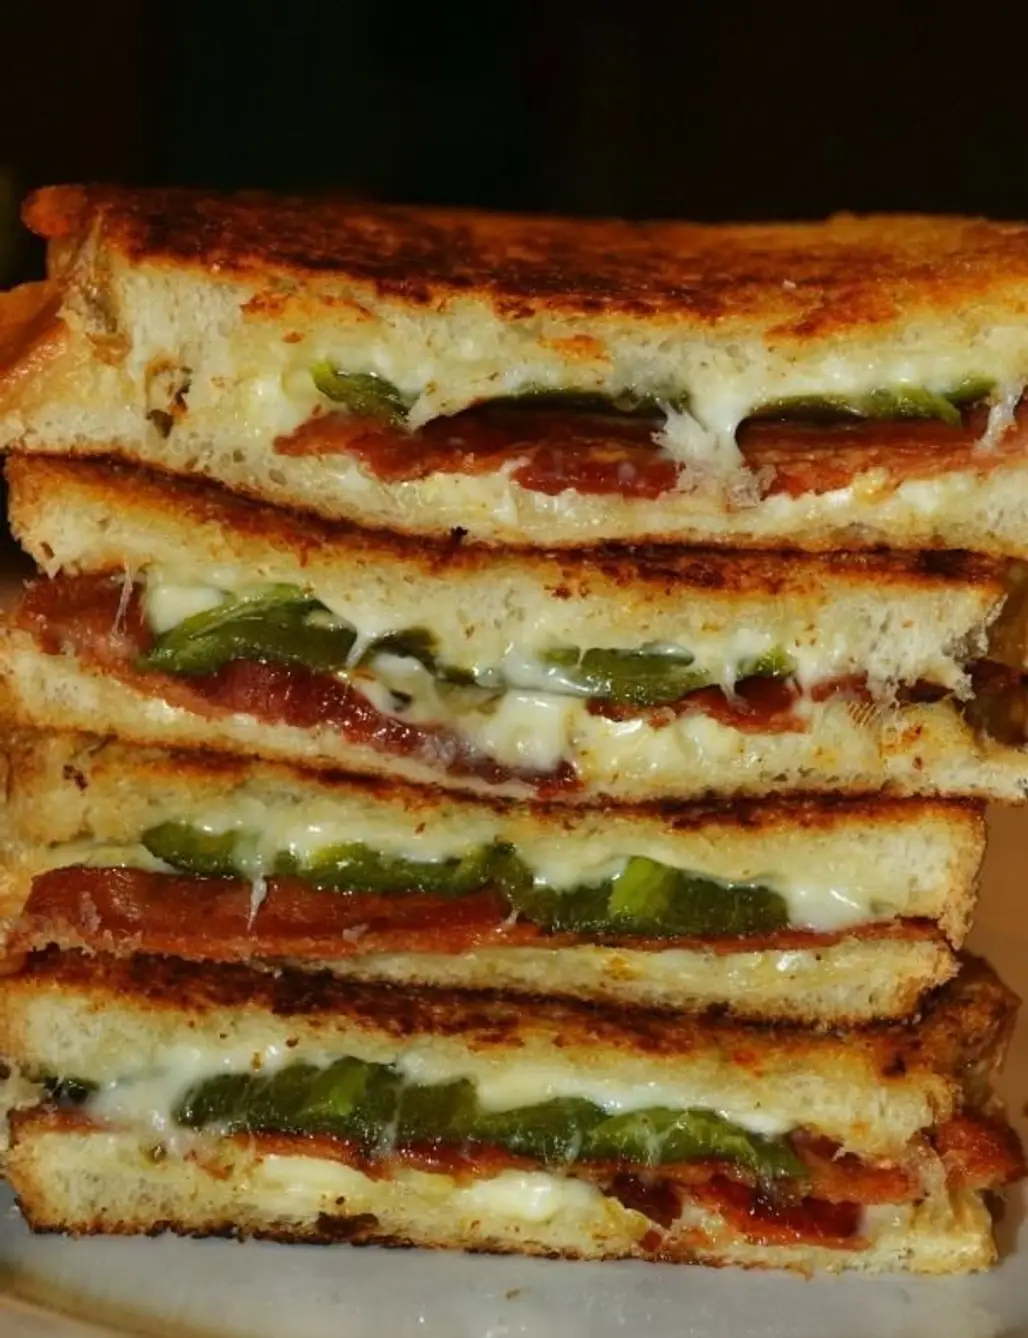 Bacon and Jalapeno Popper Grilled Cheese Sandwiches